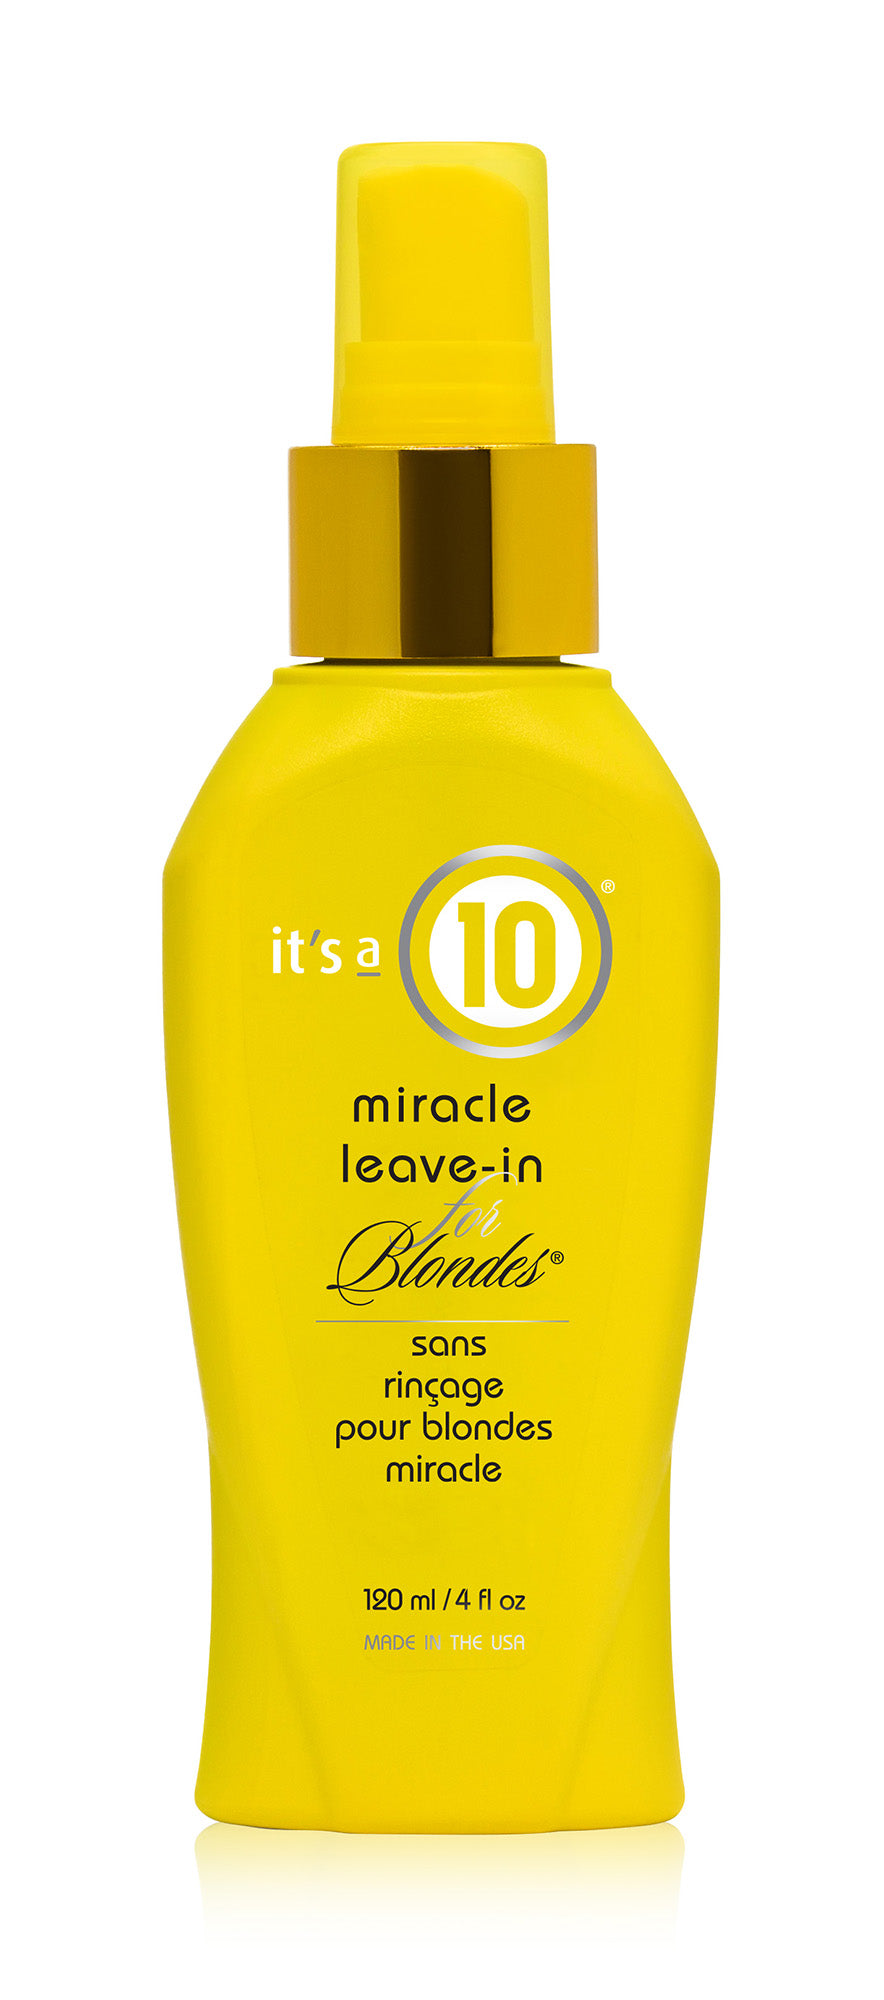 It's a 10 Miracle Leave-In Conditioner, For Blondes - 4 oz bottle